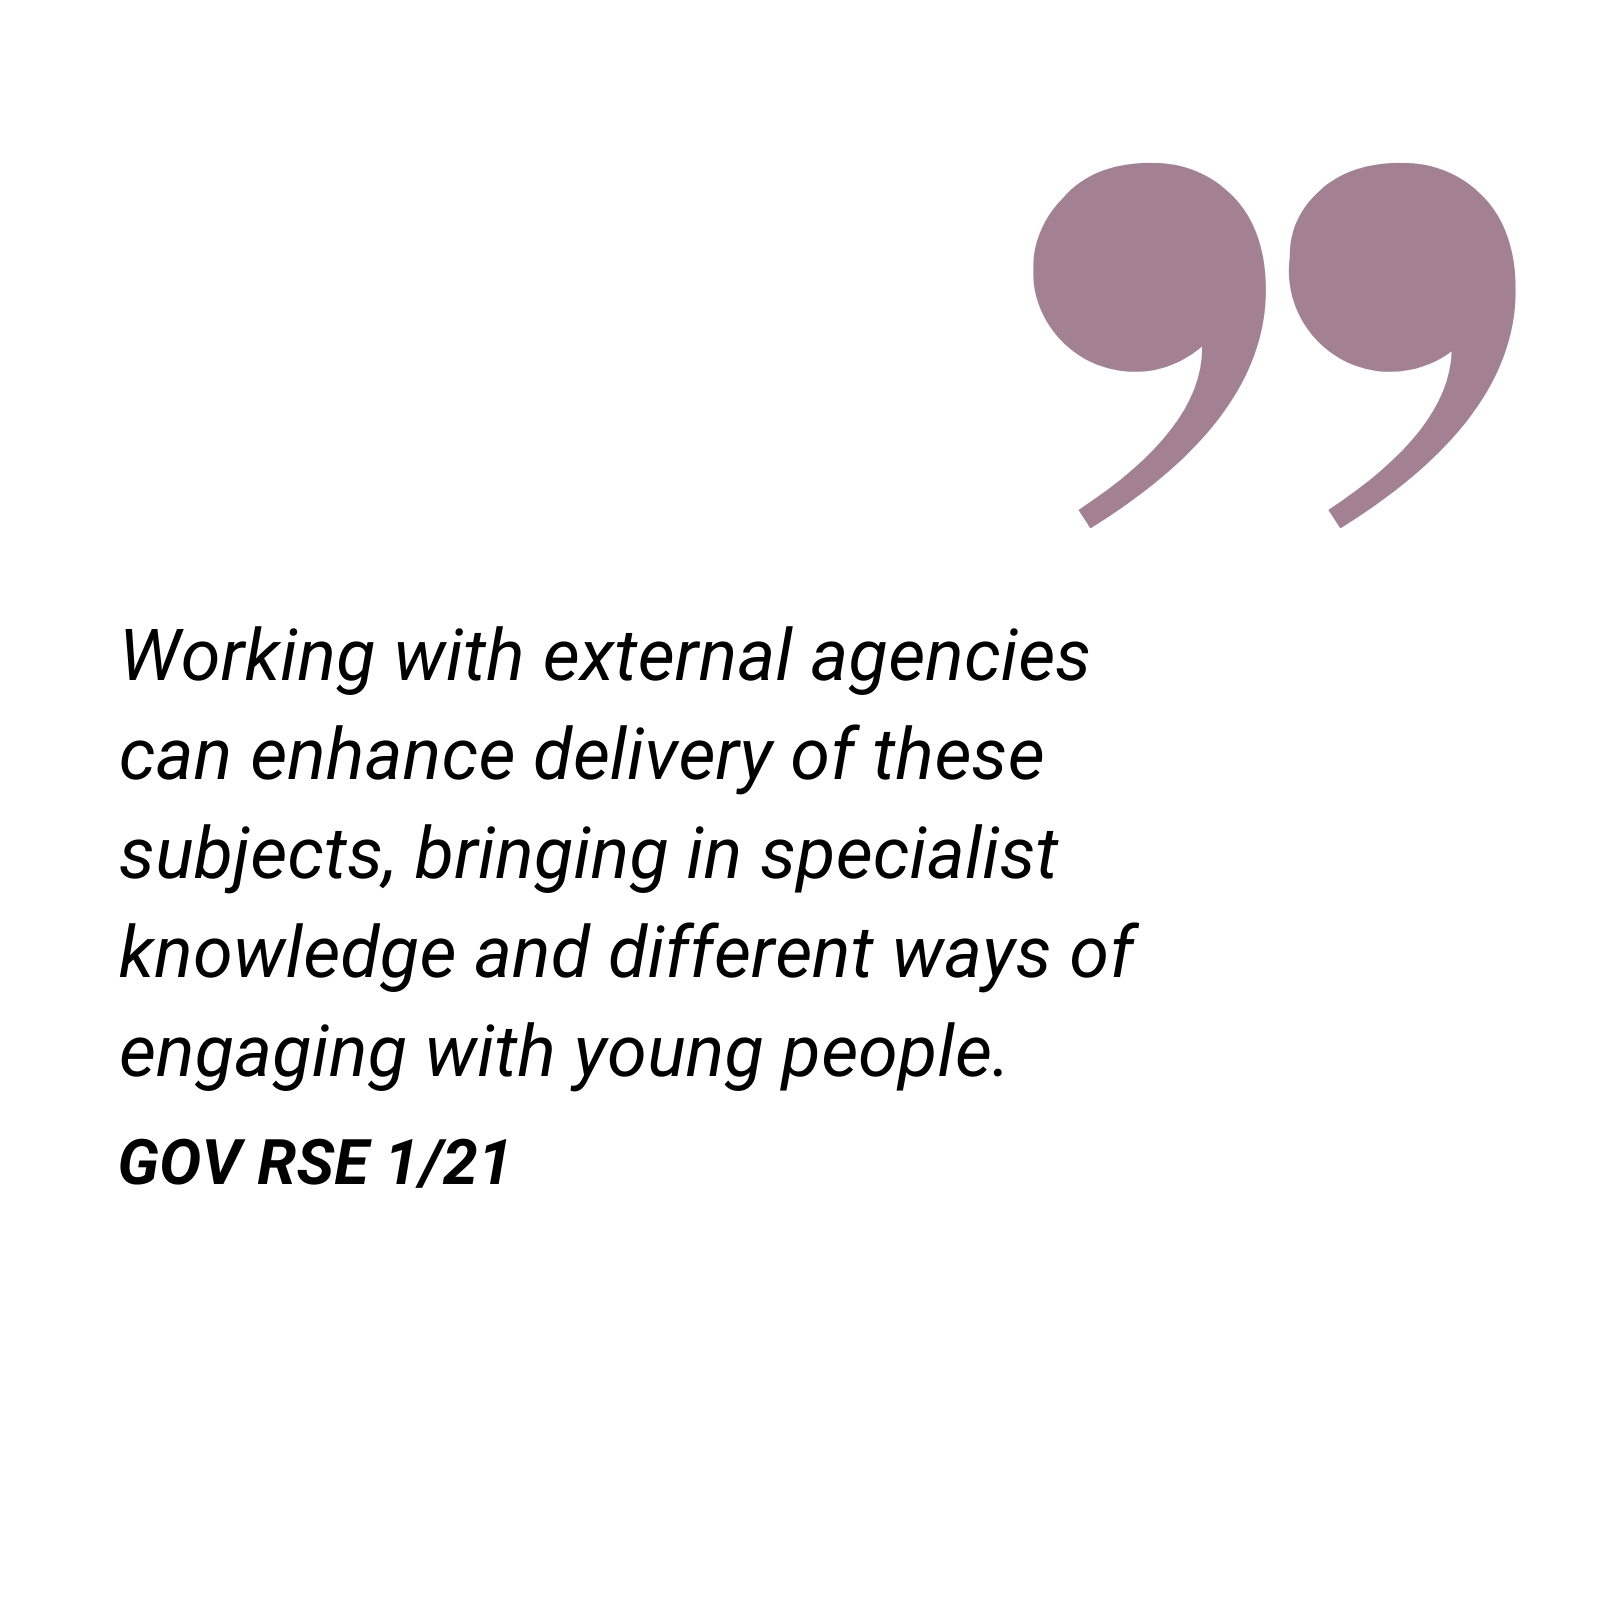 Working with external agencies can enhance delivery of these subjects, bringing in specialist knowledge and different ways of engaging with young people.